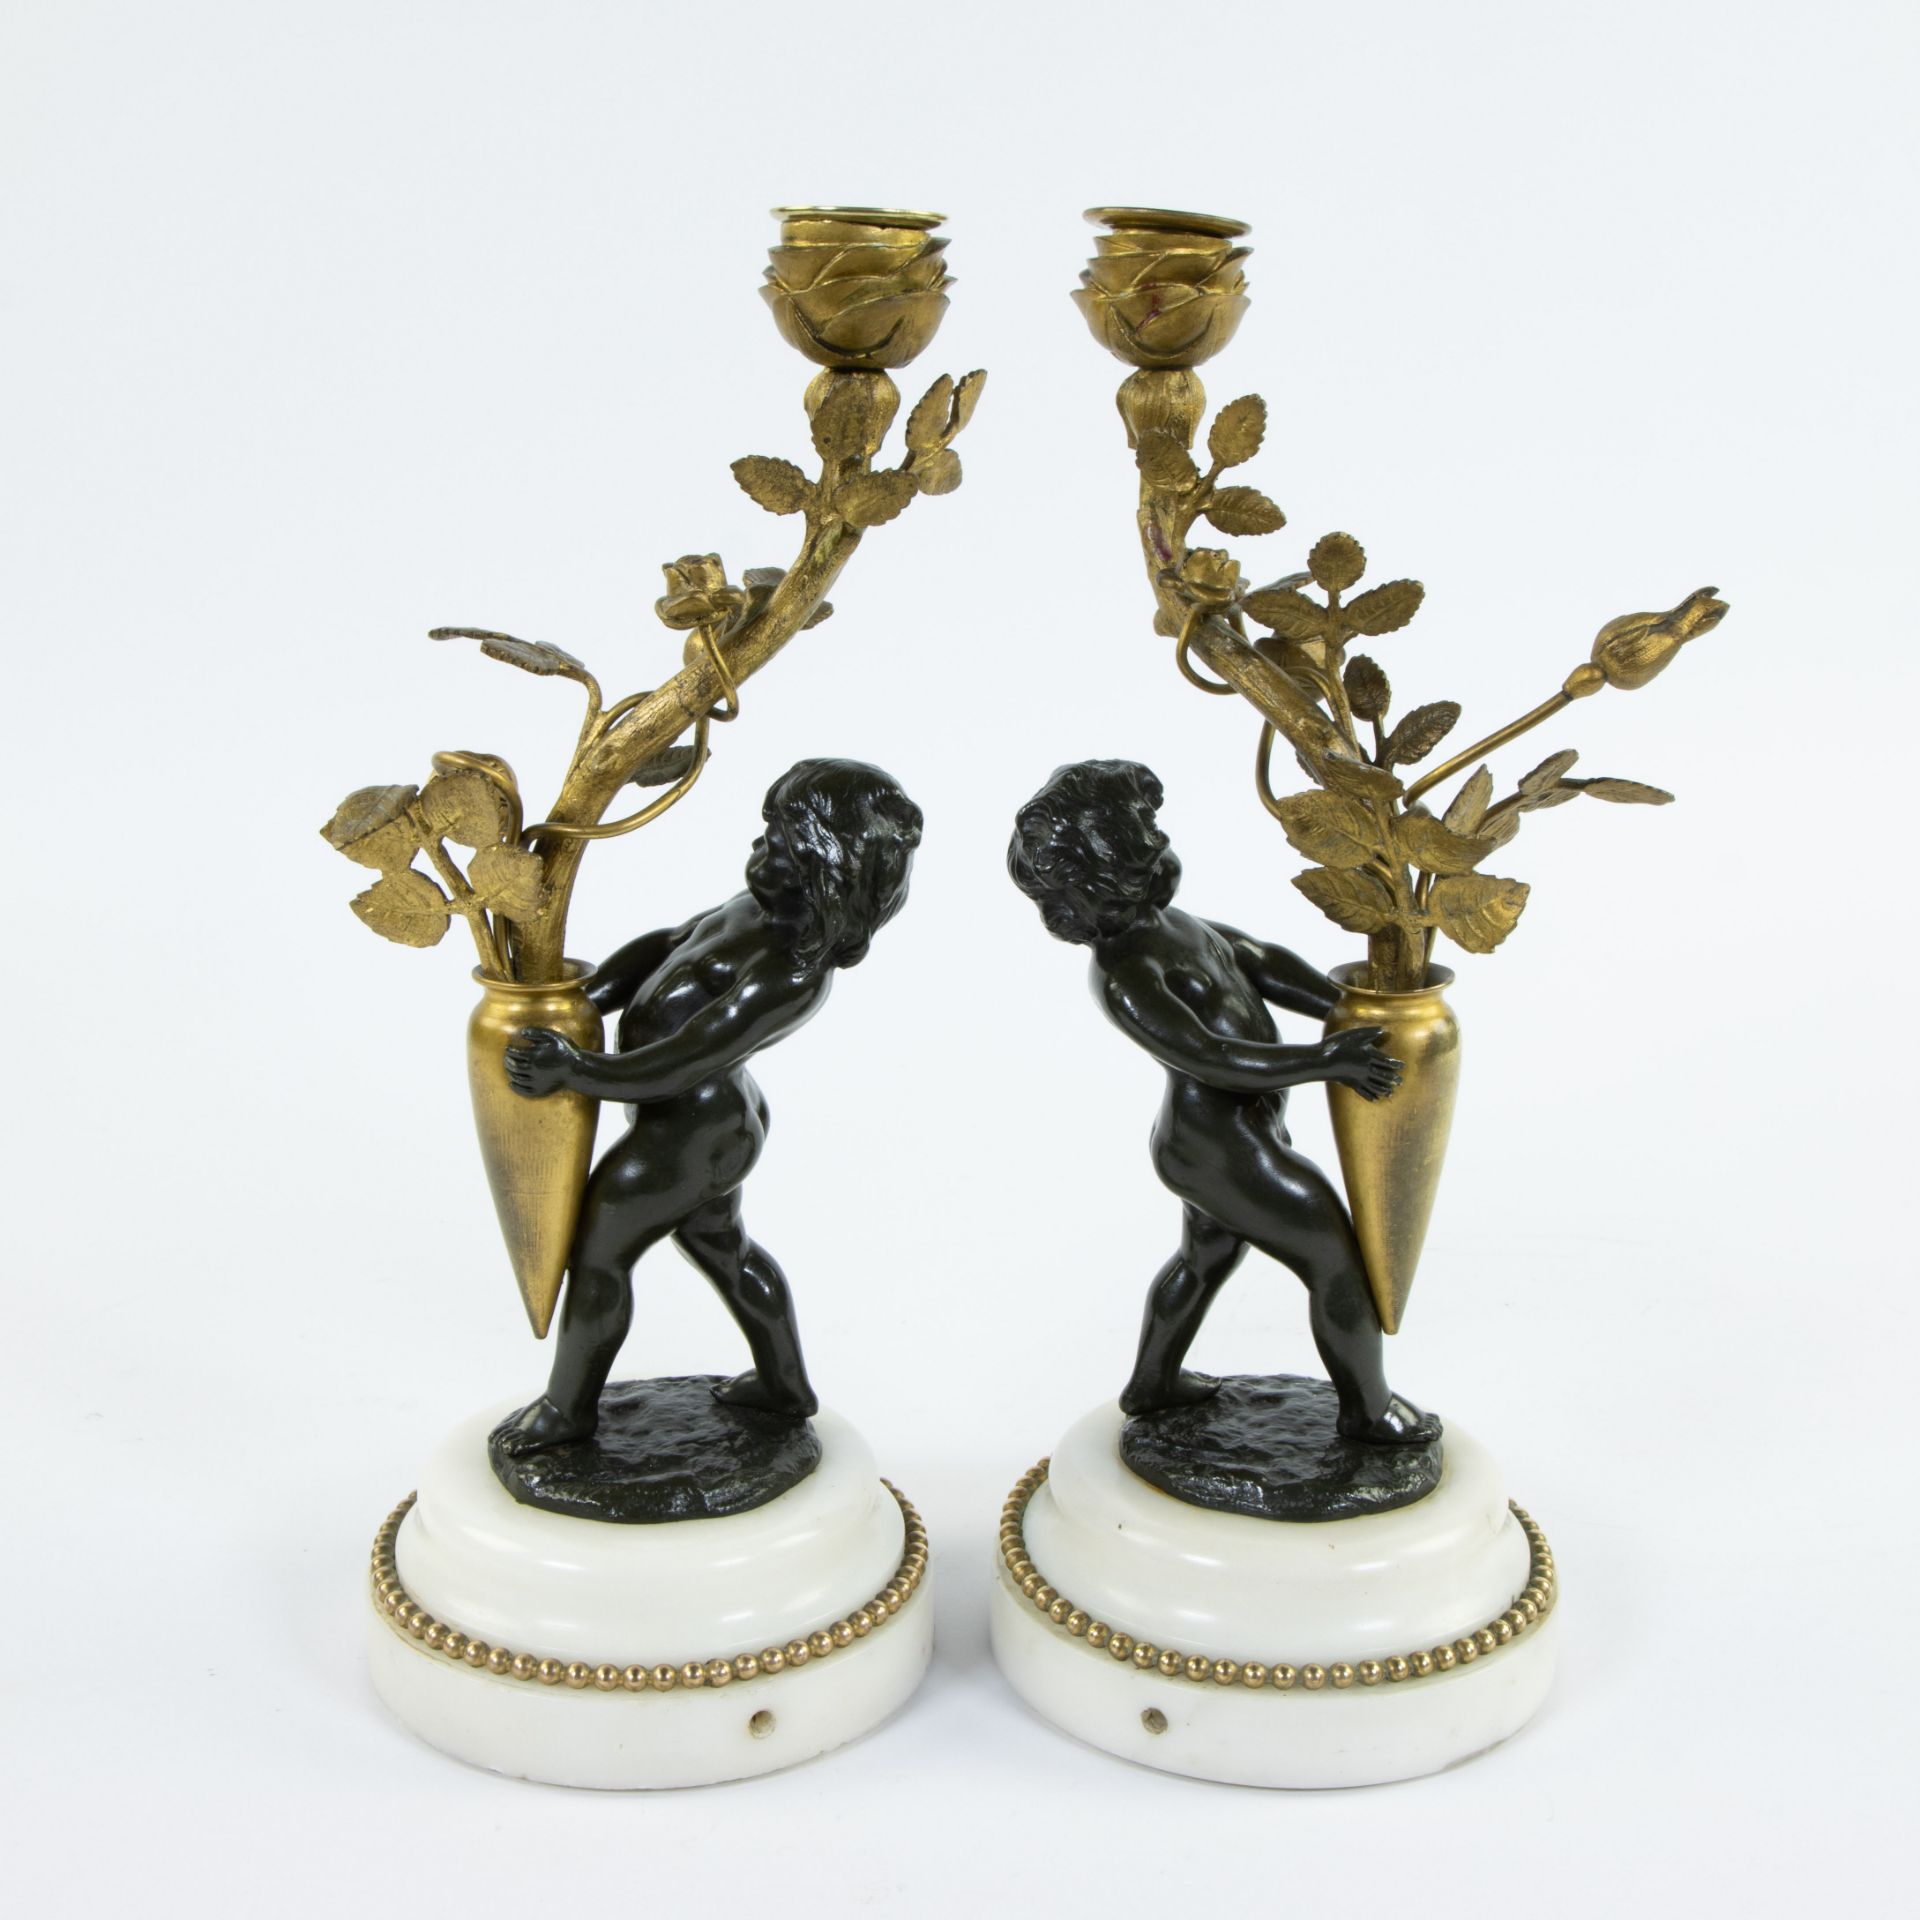 Pair of candlesticks gilded stem as light point carried by brown patinated bronze children on white - Image 3 of 5